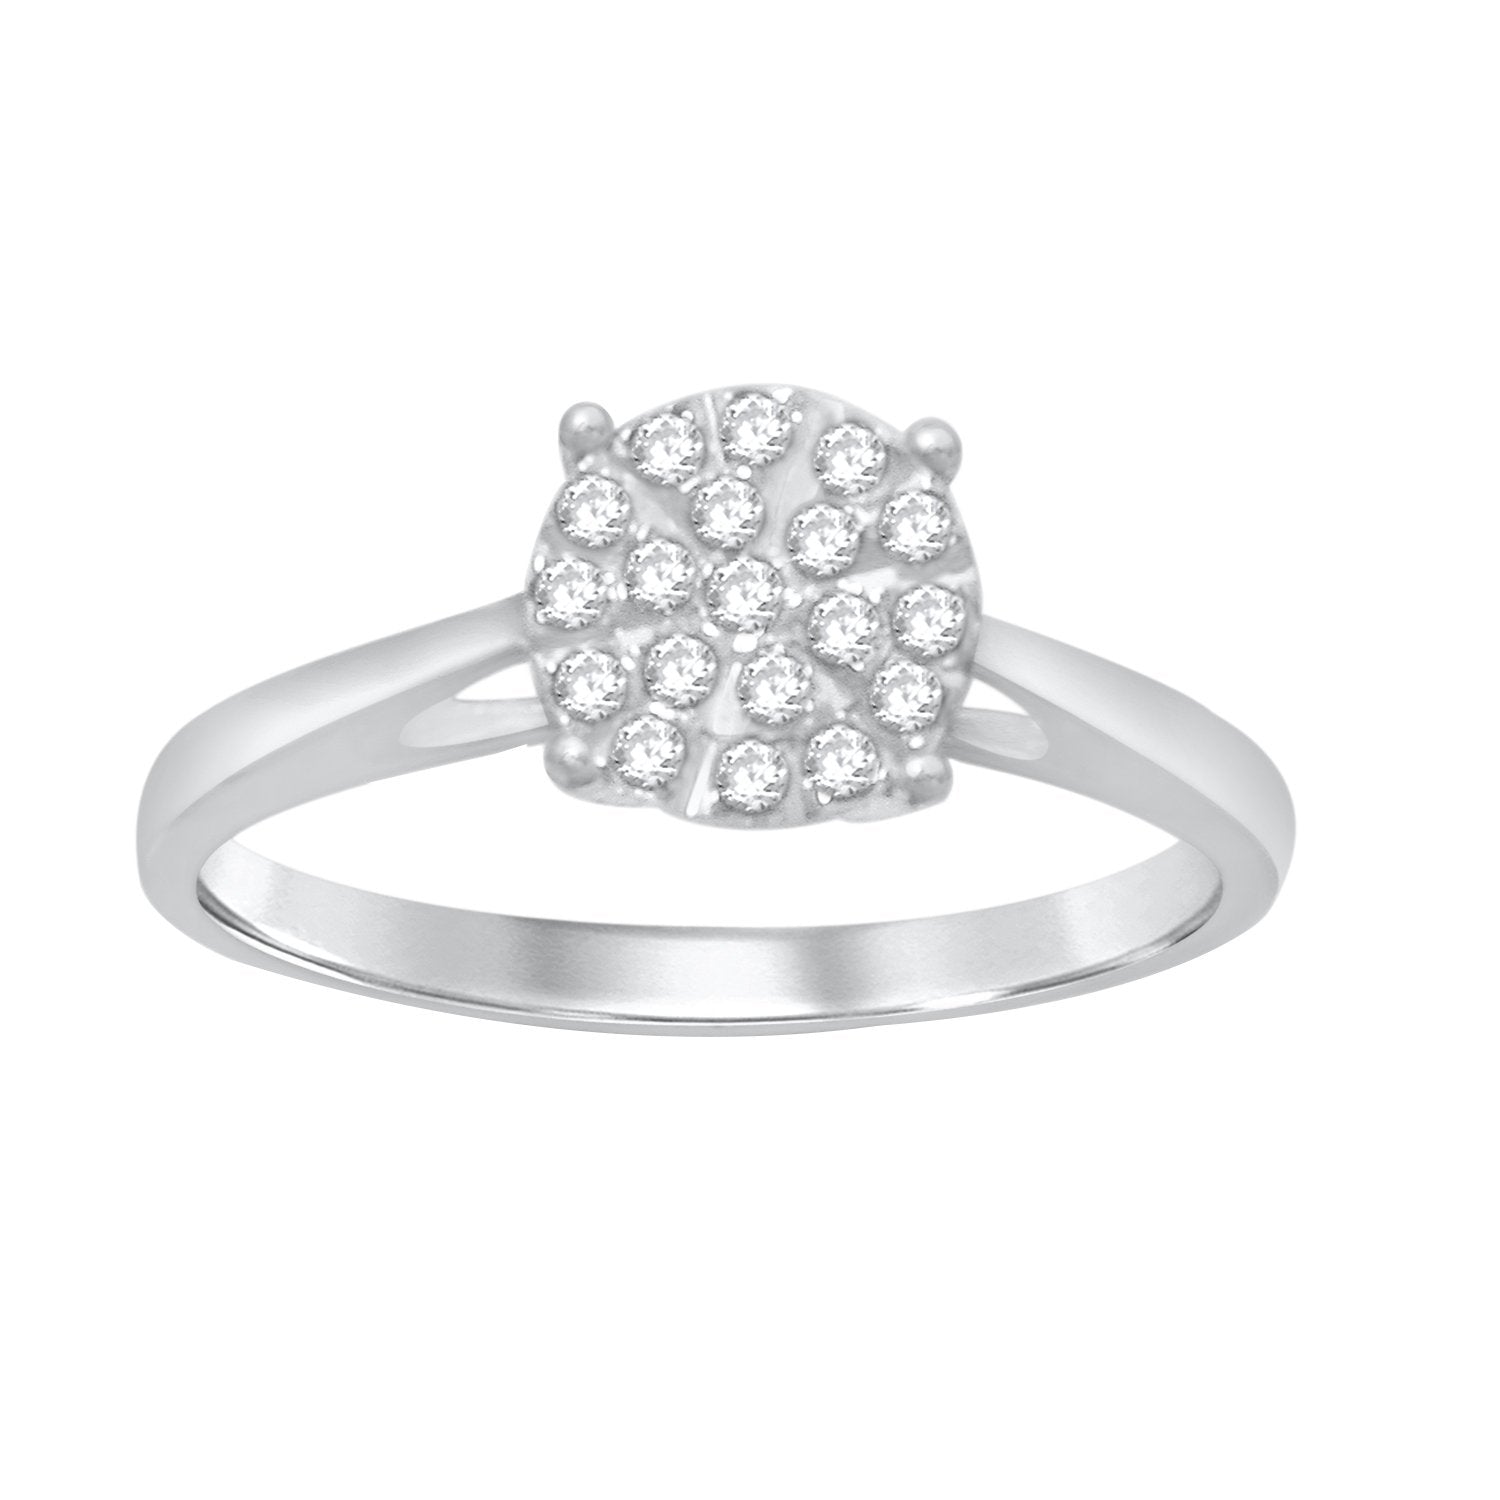 Martina Ring with 1/4ct of Diamonds in 9ct White Gold Rings Bevilles 